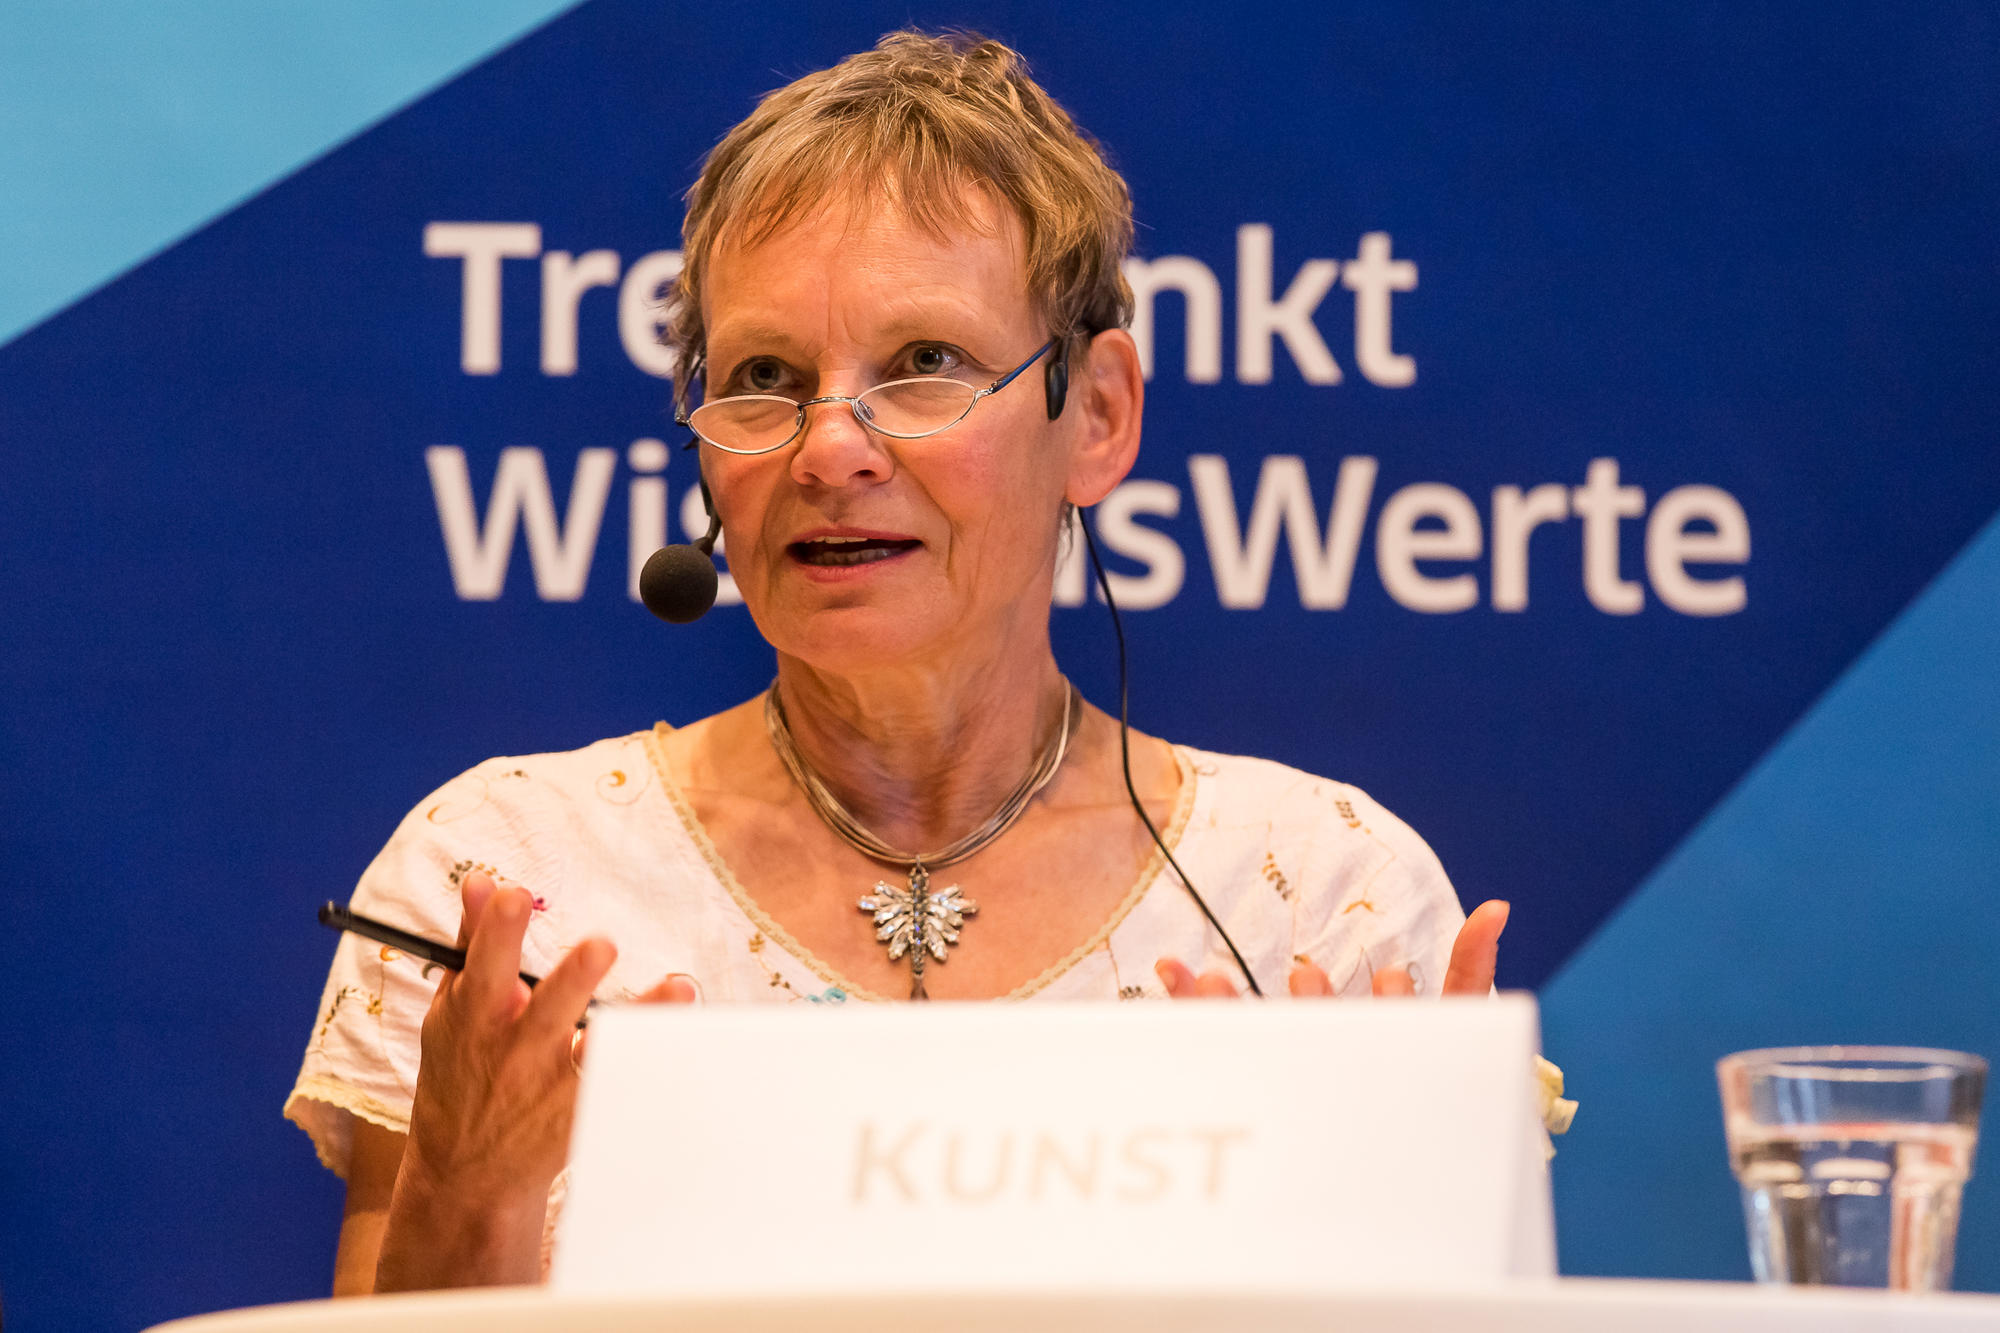 Sabine Kunst, the president of Humboldt-Universität zu Berlin, explains what the funding from the Excellence Initiative at her university was able to achieve.